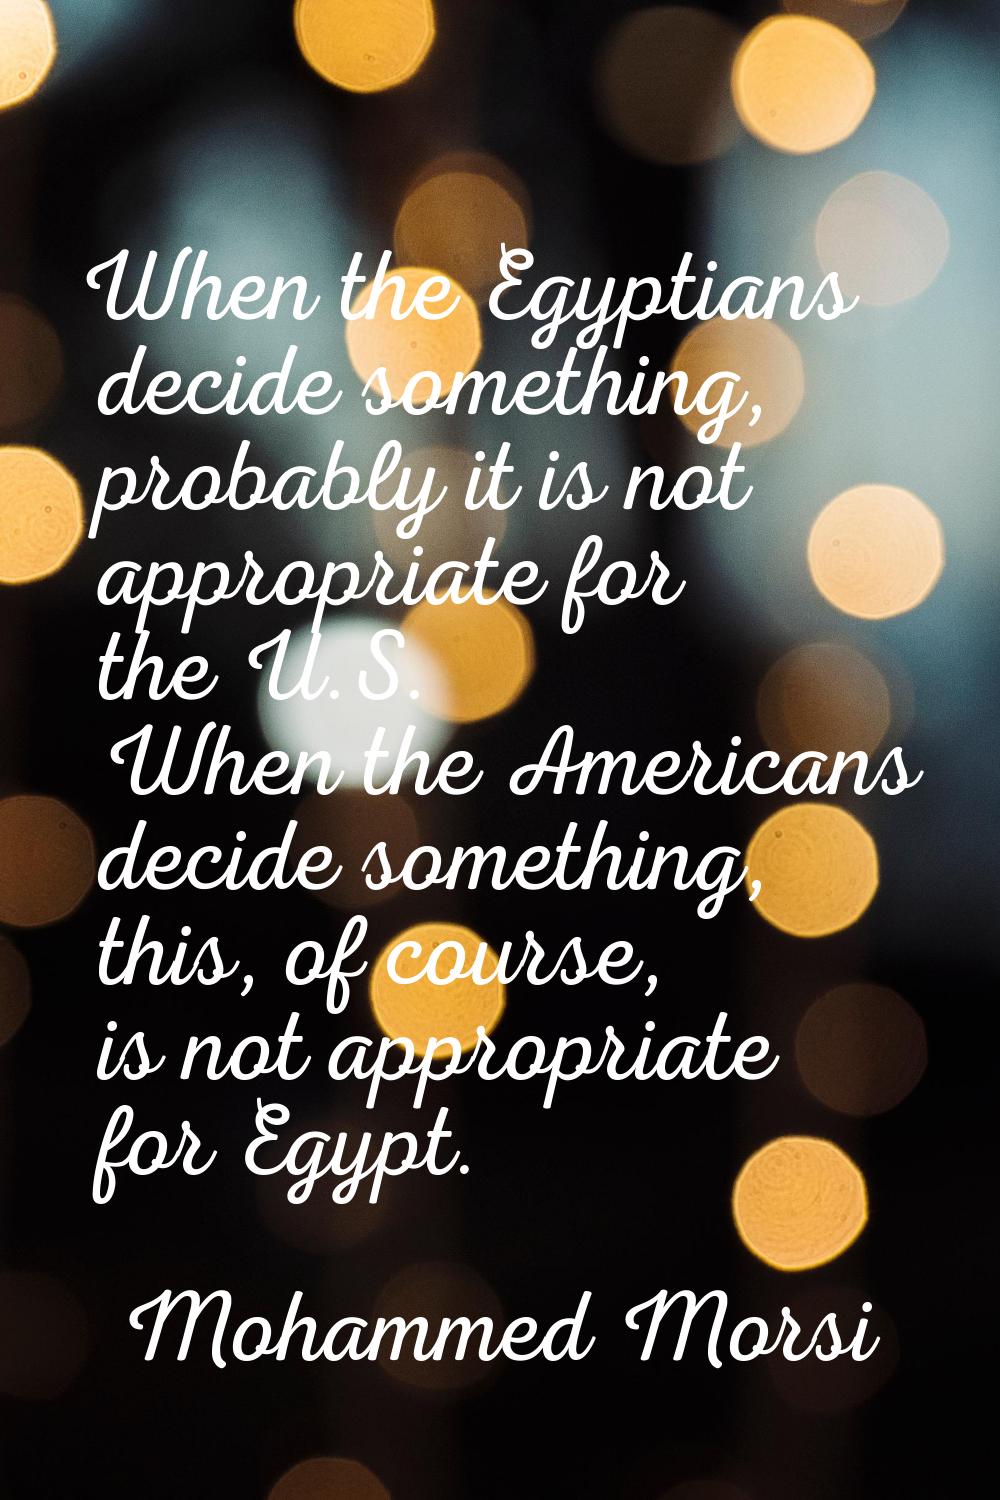 When the Egyptians decide something, probably it is not appropriate for the U.S. When the Americans